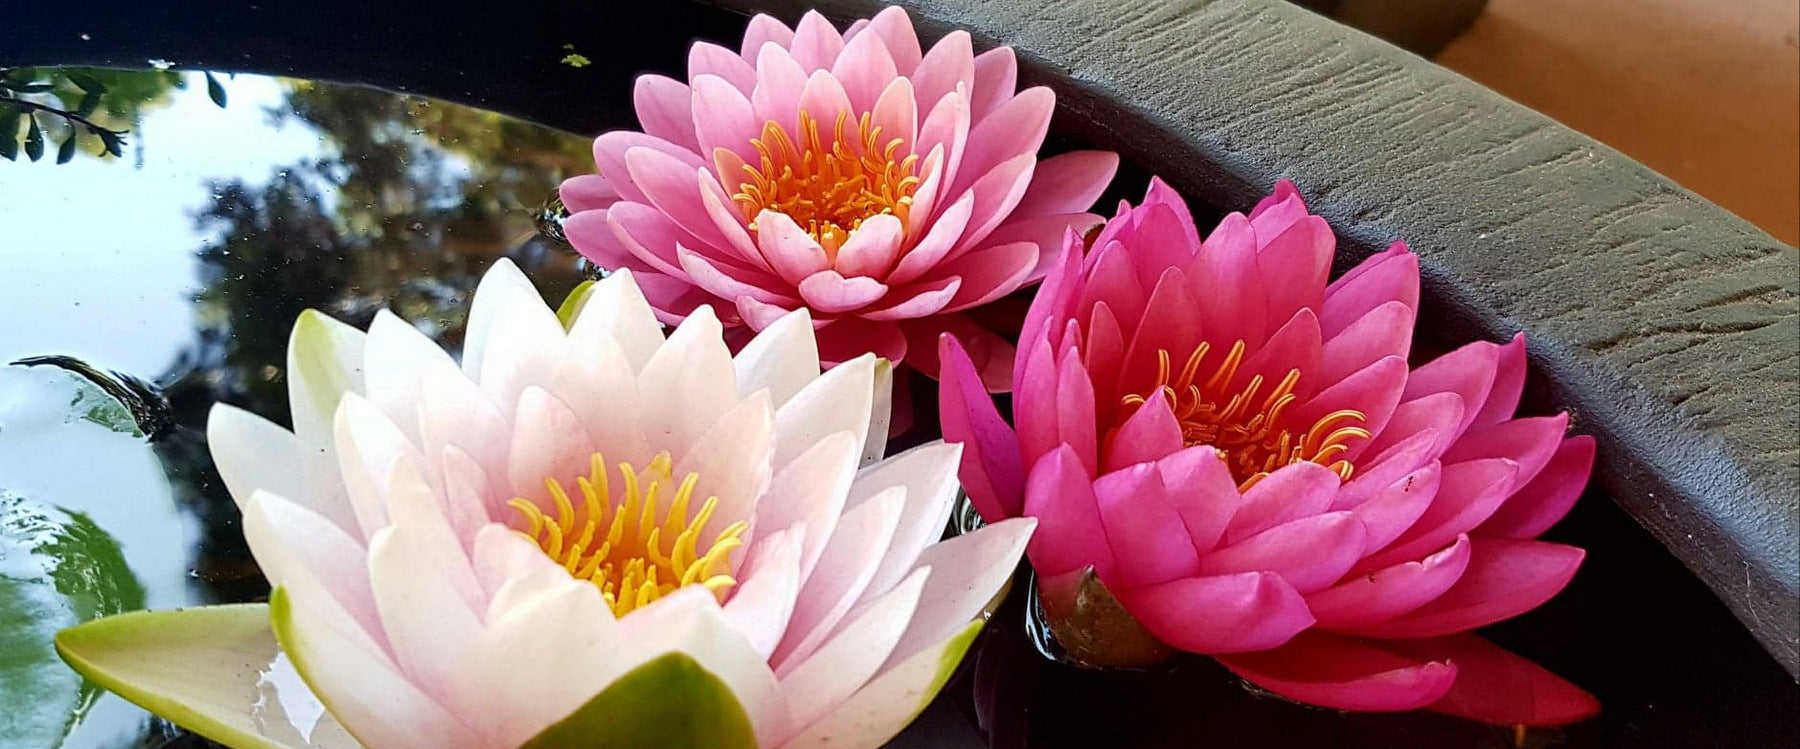 Water Lily (Lilies) In A Bowl